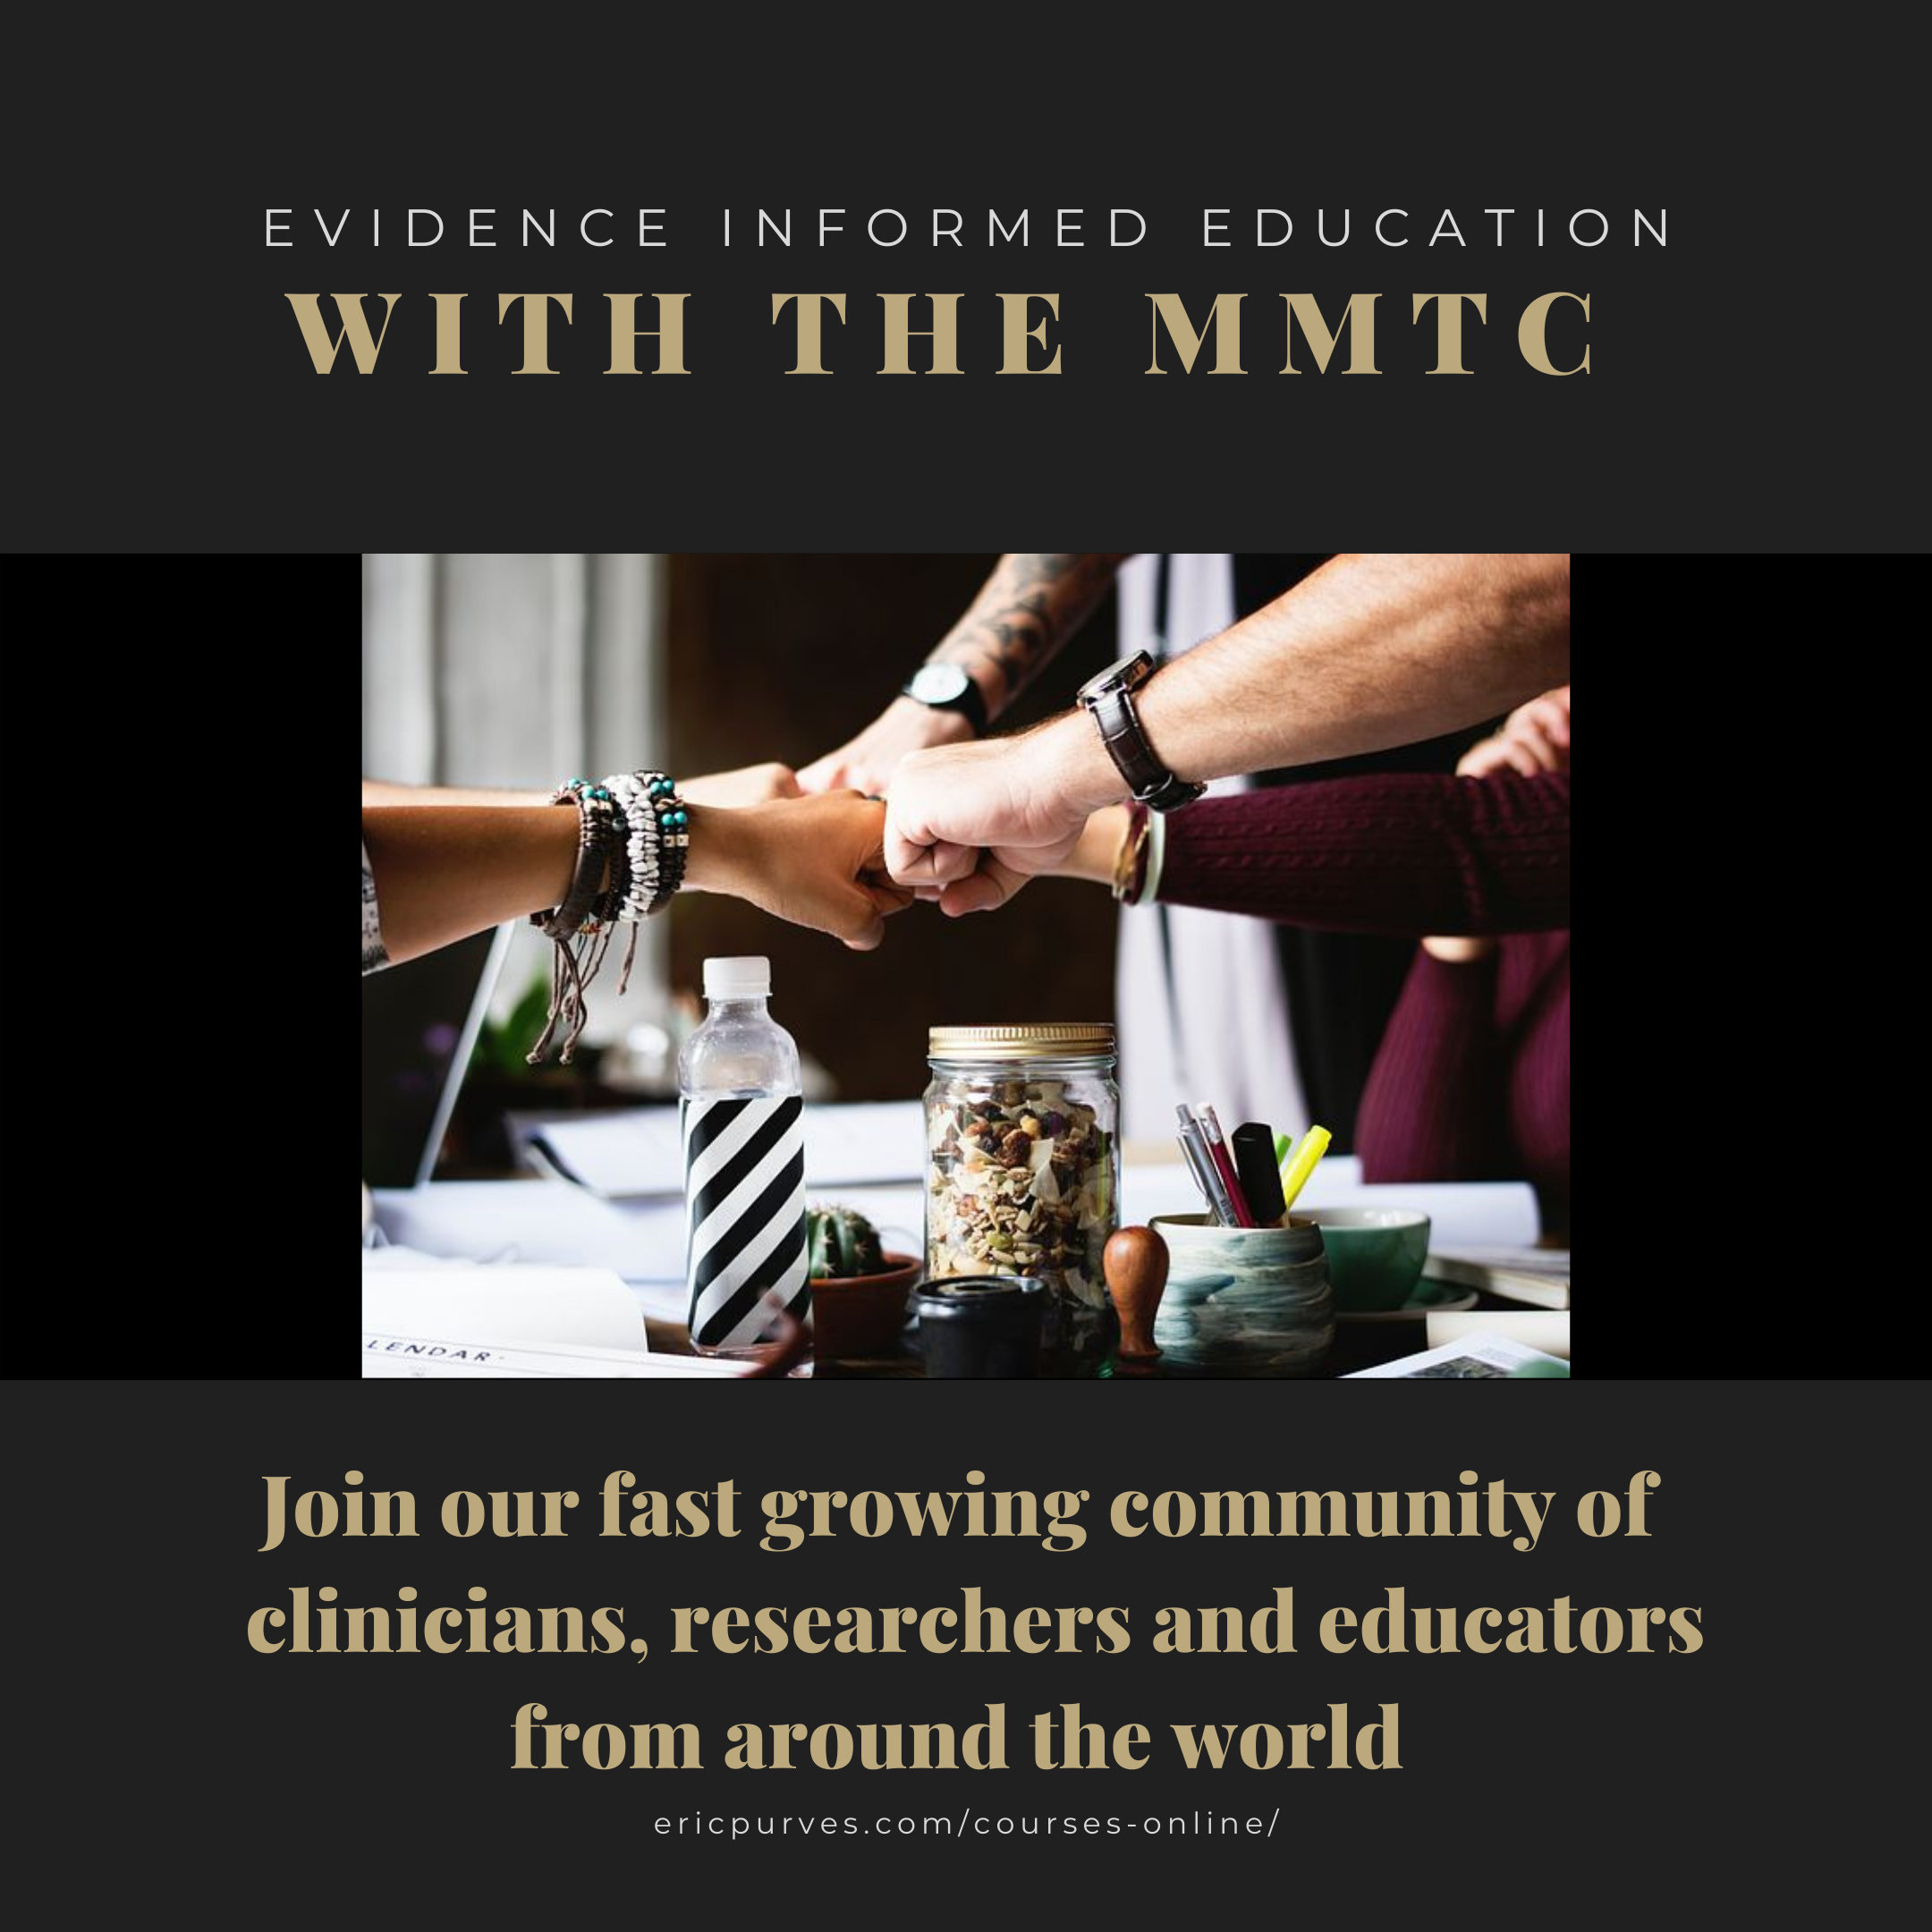 Evidence Informed Education With the MMTC: Join Our Fast Growing Community